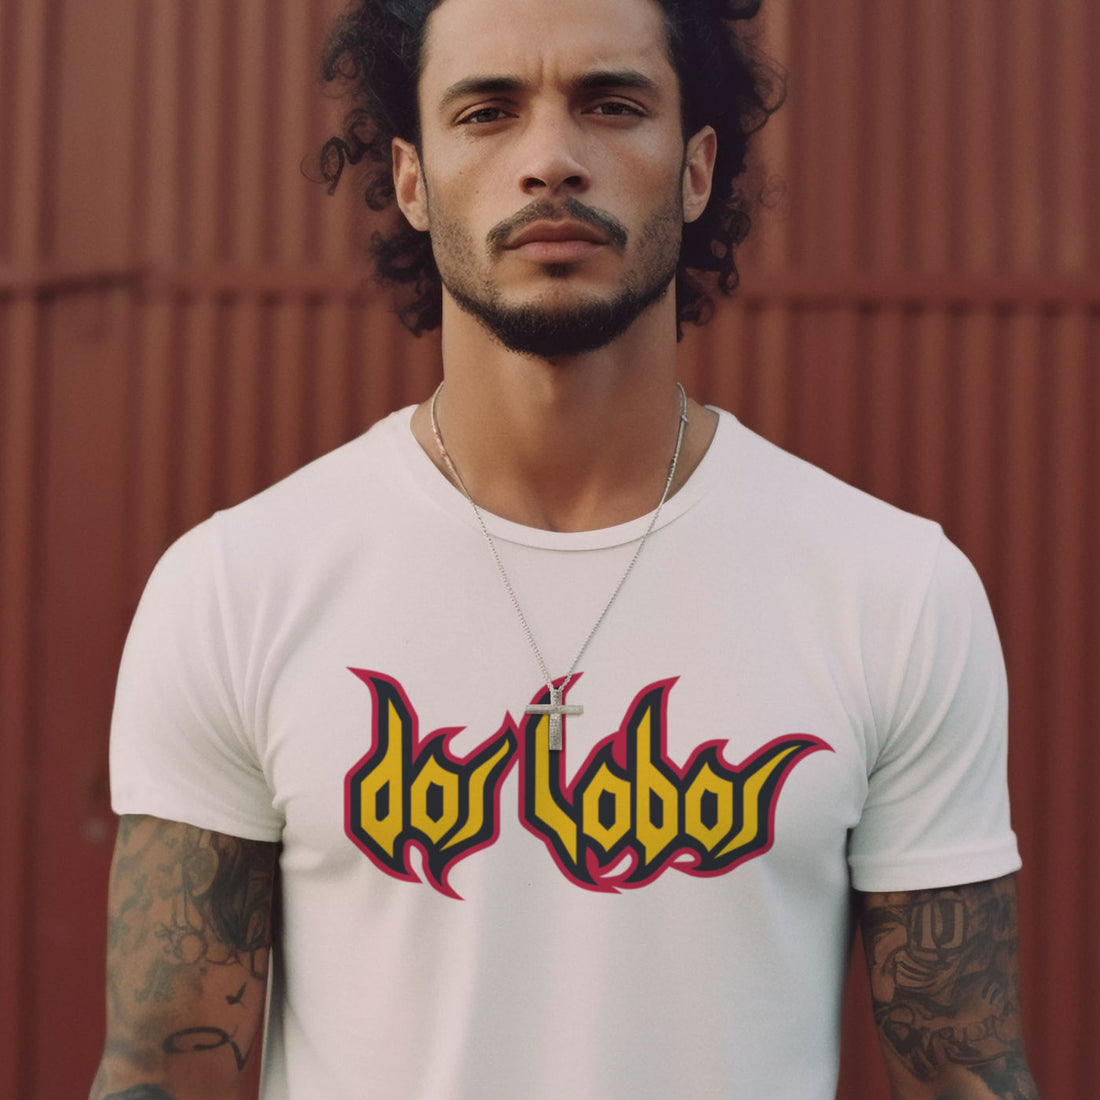 100% White Cotton Tee by Dos Lobos - Inner Flame